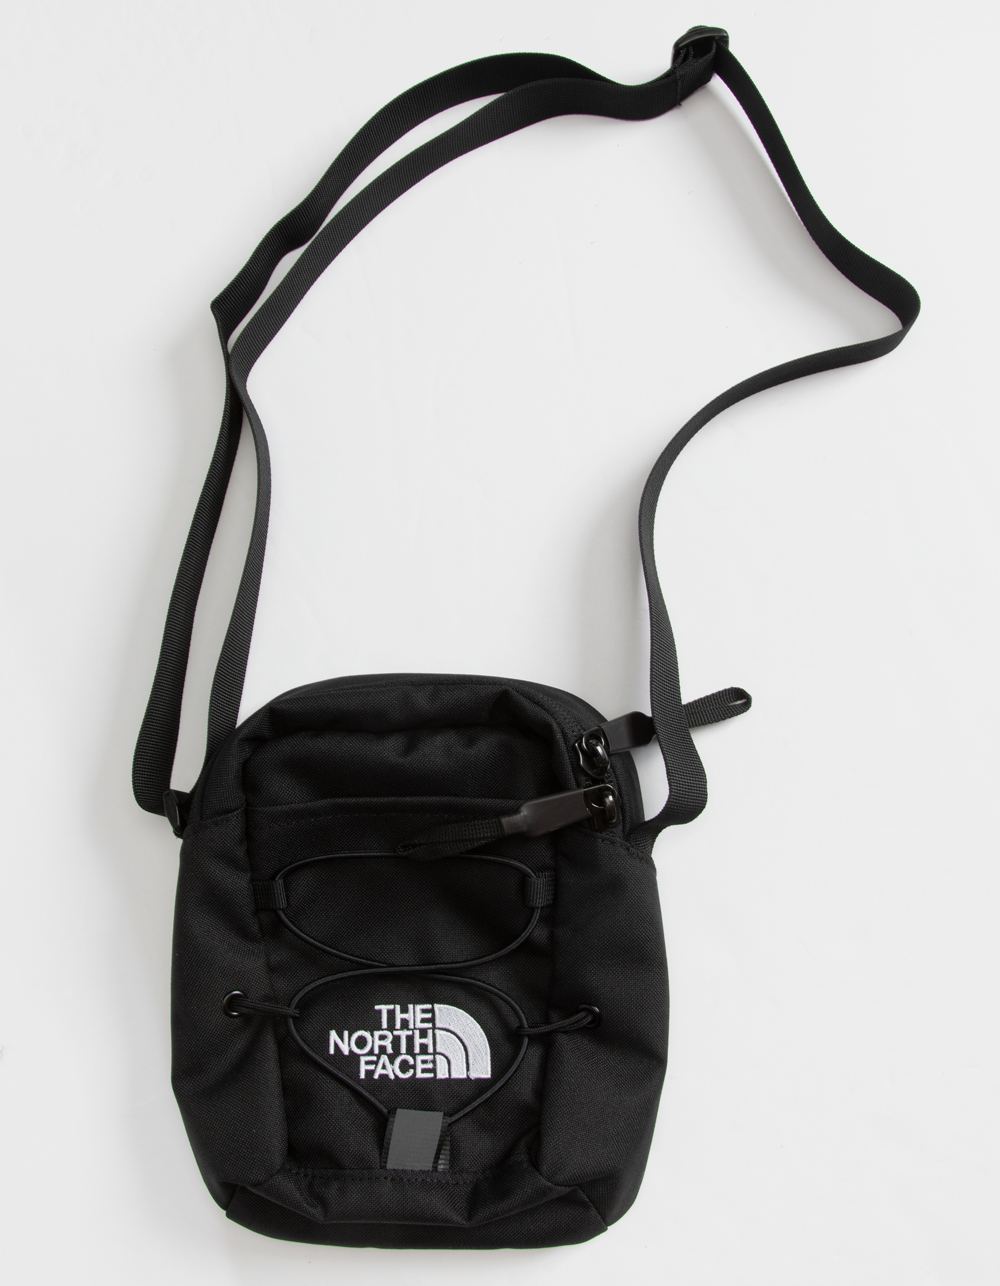 The North Face The North Face Field Crossbody Bag in Black  Lyst